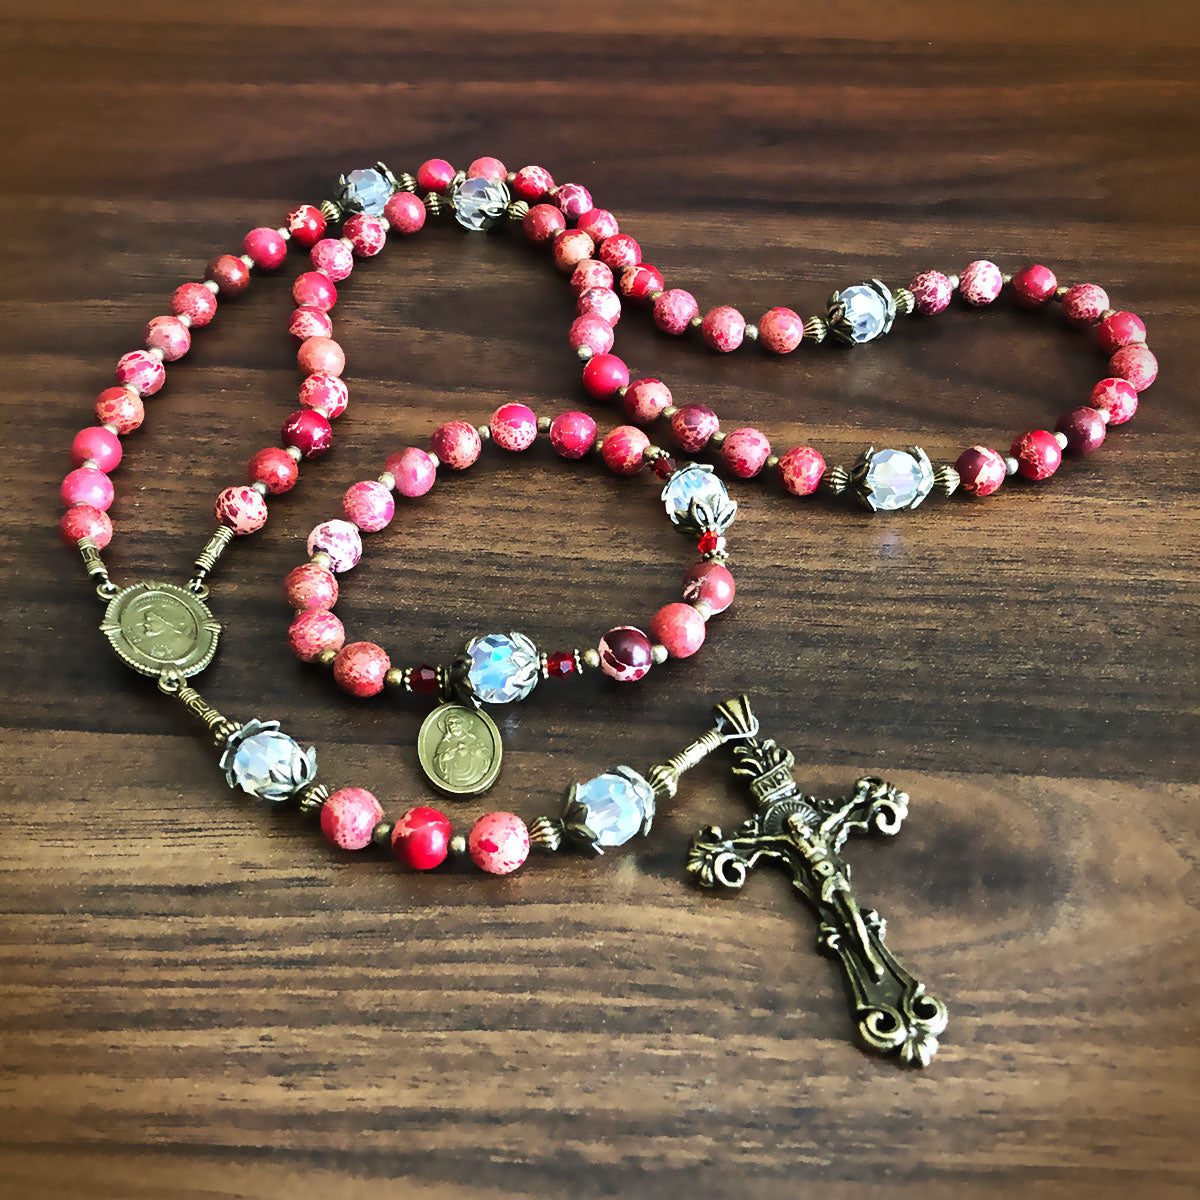 Sacred Heart of Jesus Stone and Crystal Rosary and Bracelet Deluxe Boxed Set by Catholic Heirlooms